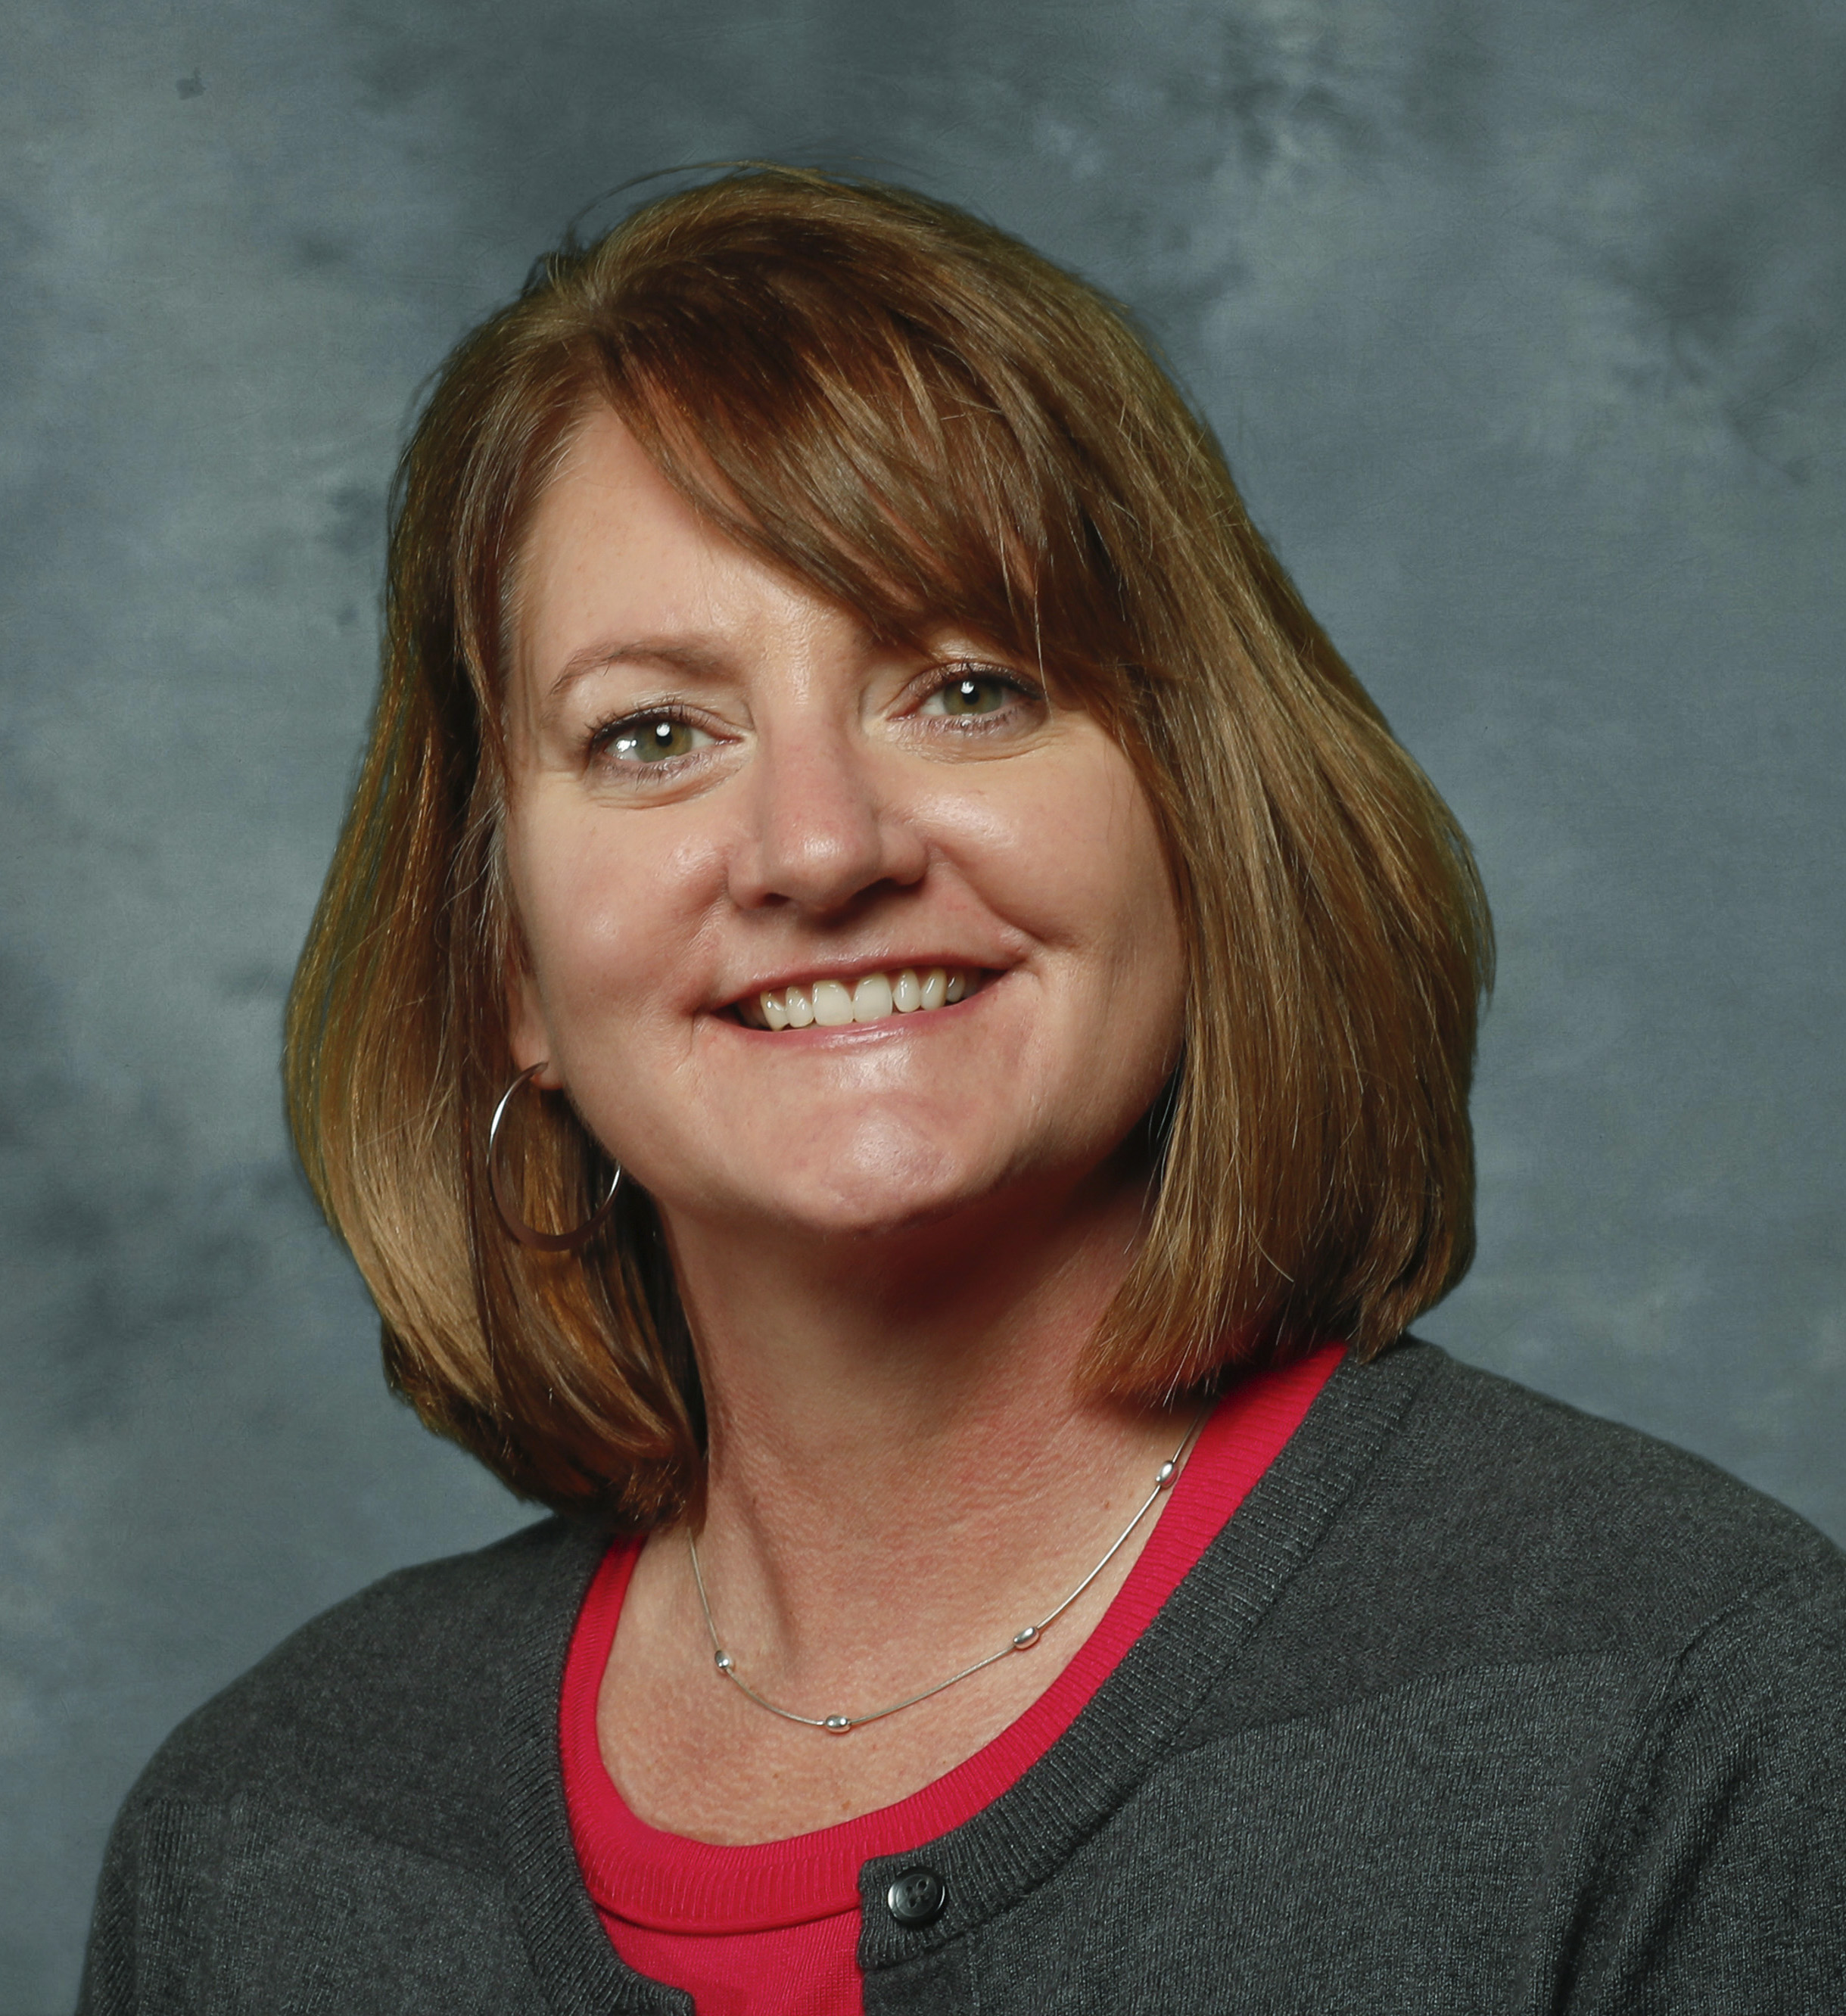 Tracy Anderson, Extension Educator in Lancaster County